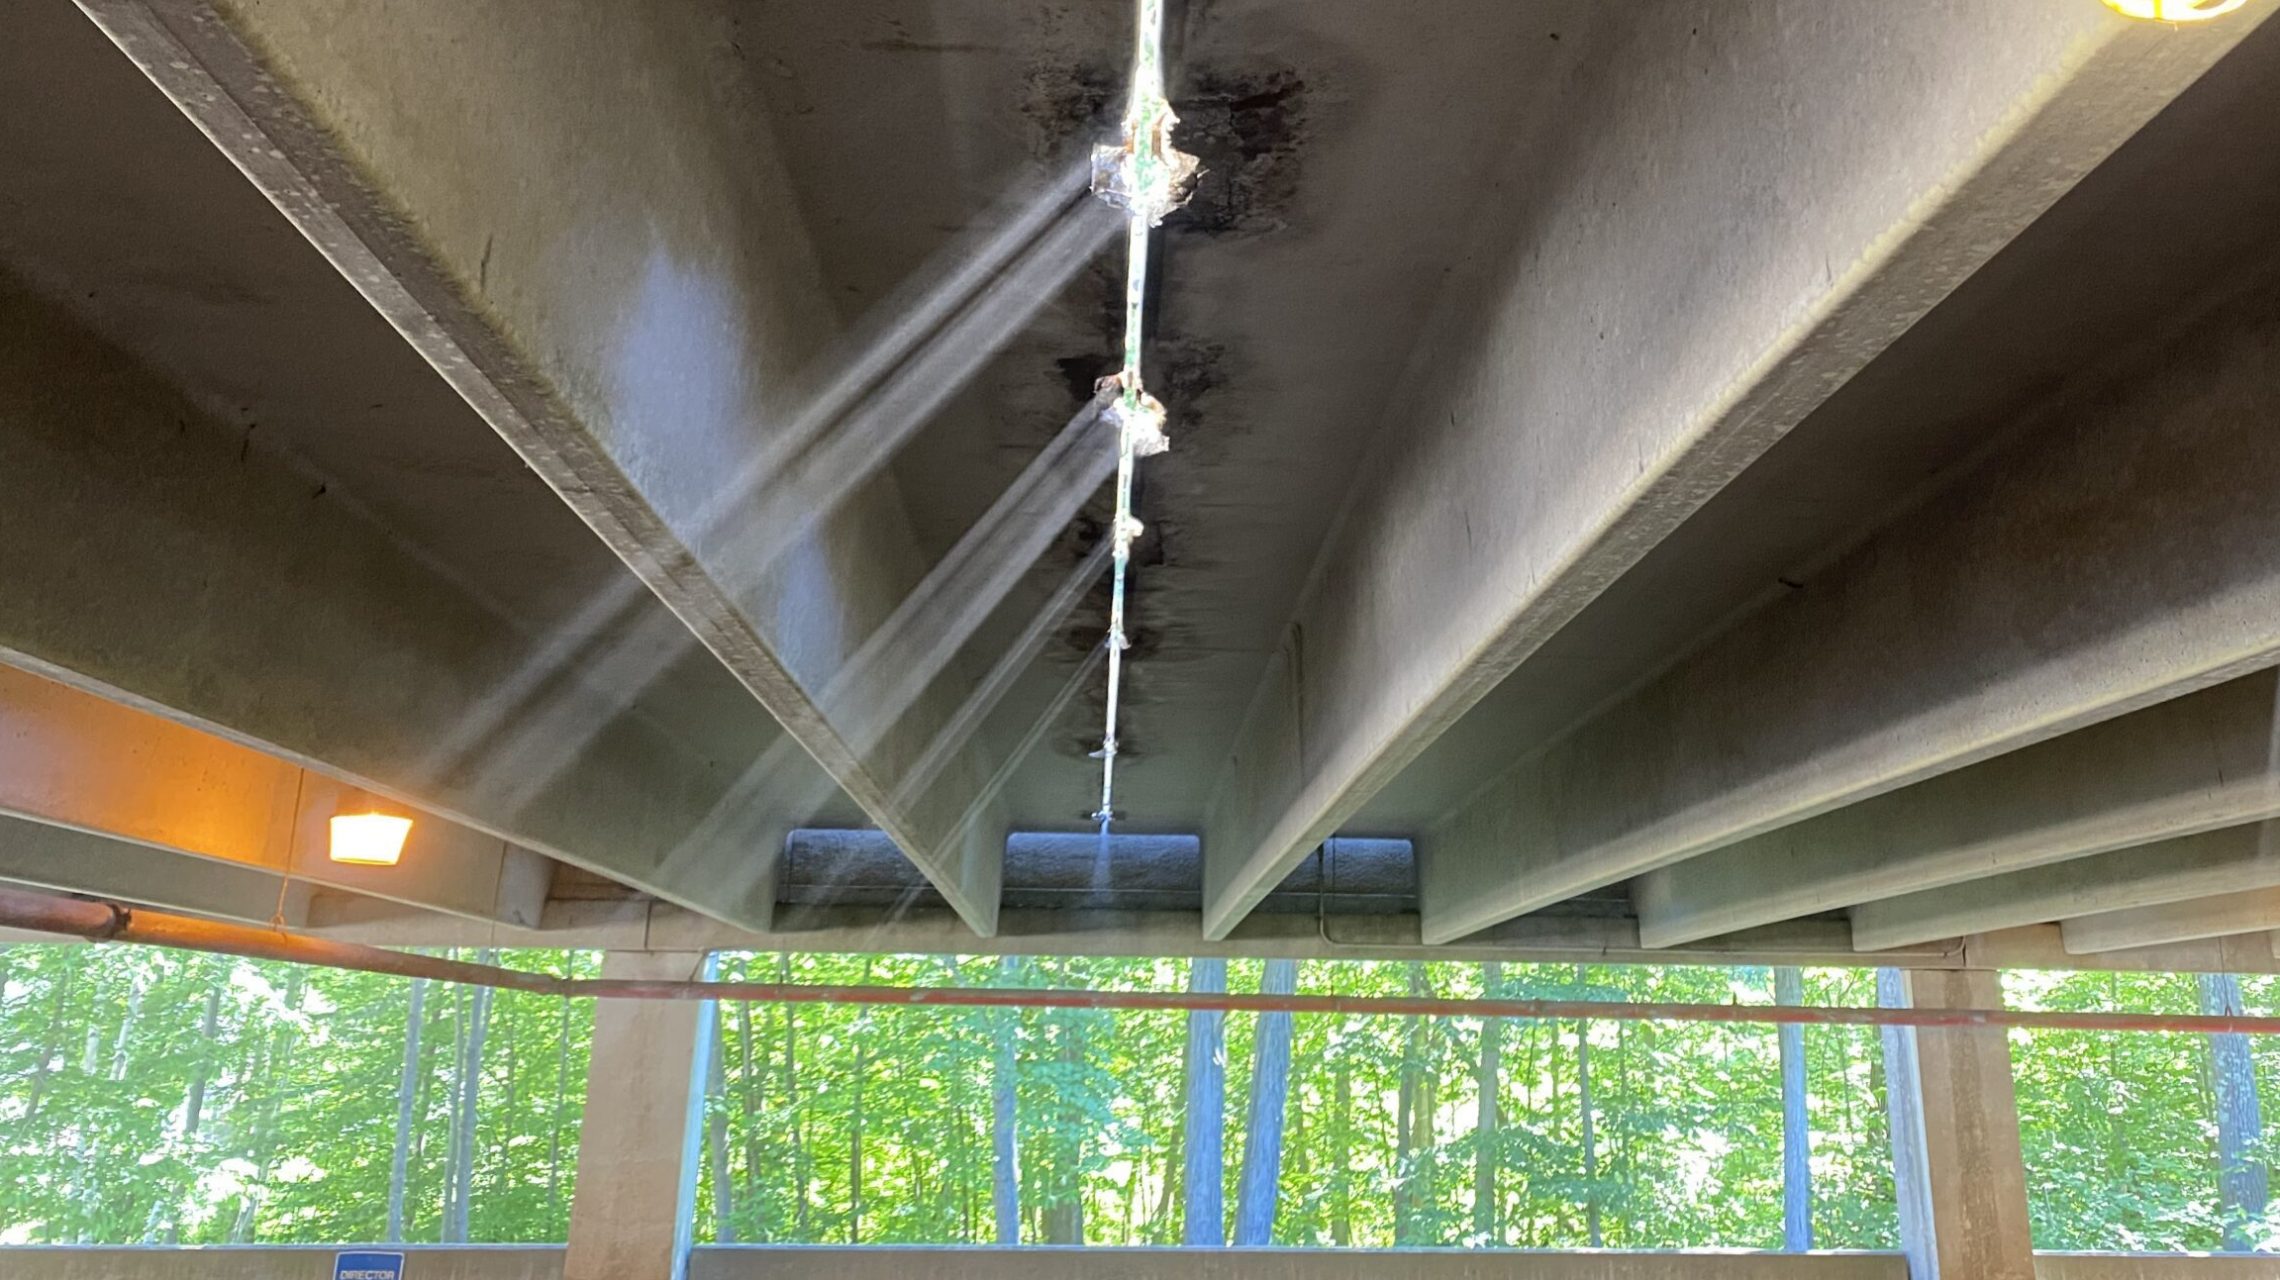 Daylight shines through an open flange-to-flange joint during a connection repair project.